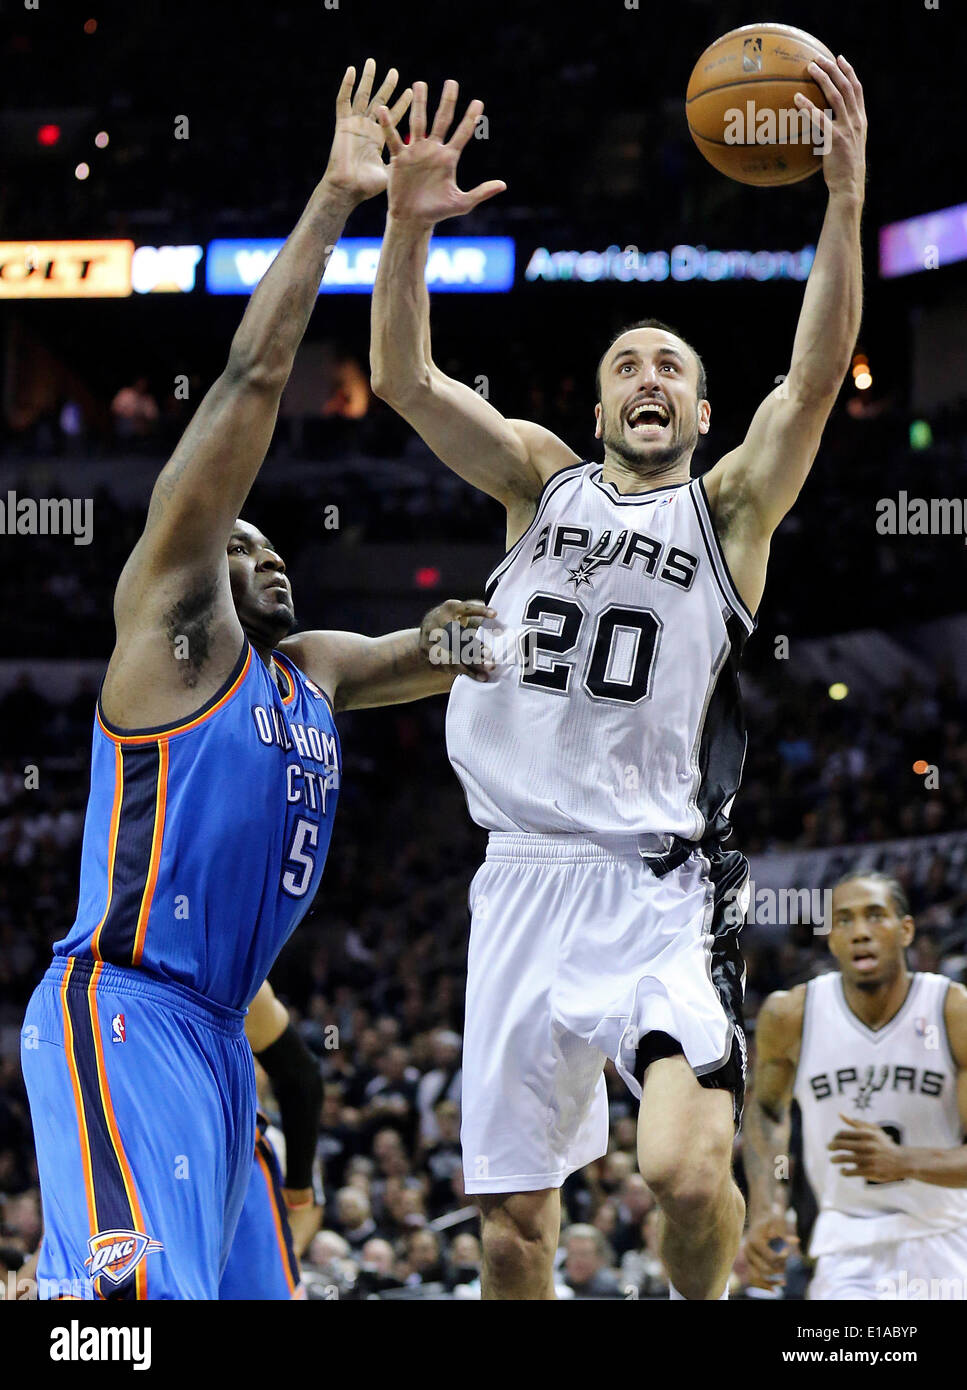 May 19, 2014 - San Antonio, TEXAS, USA - San Antonio Spurs' Manu Ginobili drives to the basket around Oklahoma City Thunder's Kendrick Perkins during second half action of Game 1 in the Western Conference Finals Monday May 19, 2014 at the AT&T Center. The Spurs won 122-105. (Credit Image: © San Antonio Express-News/ZUMAPRESS.com) Stock Photo